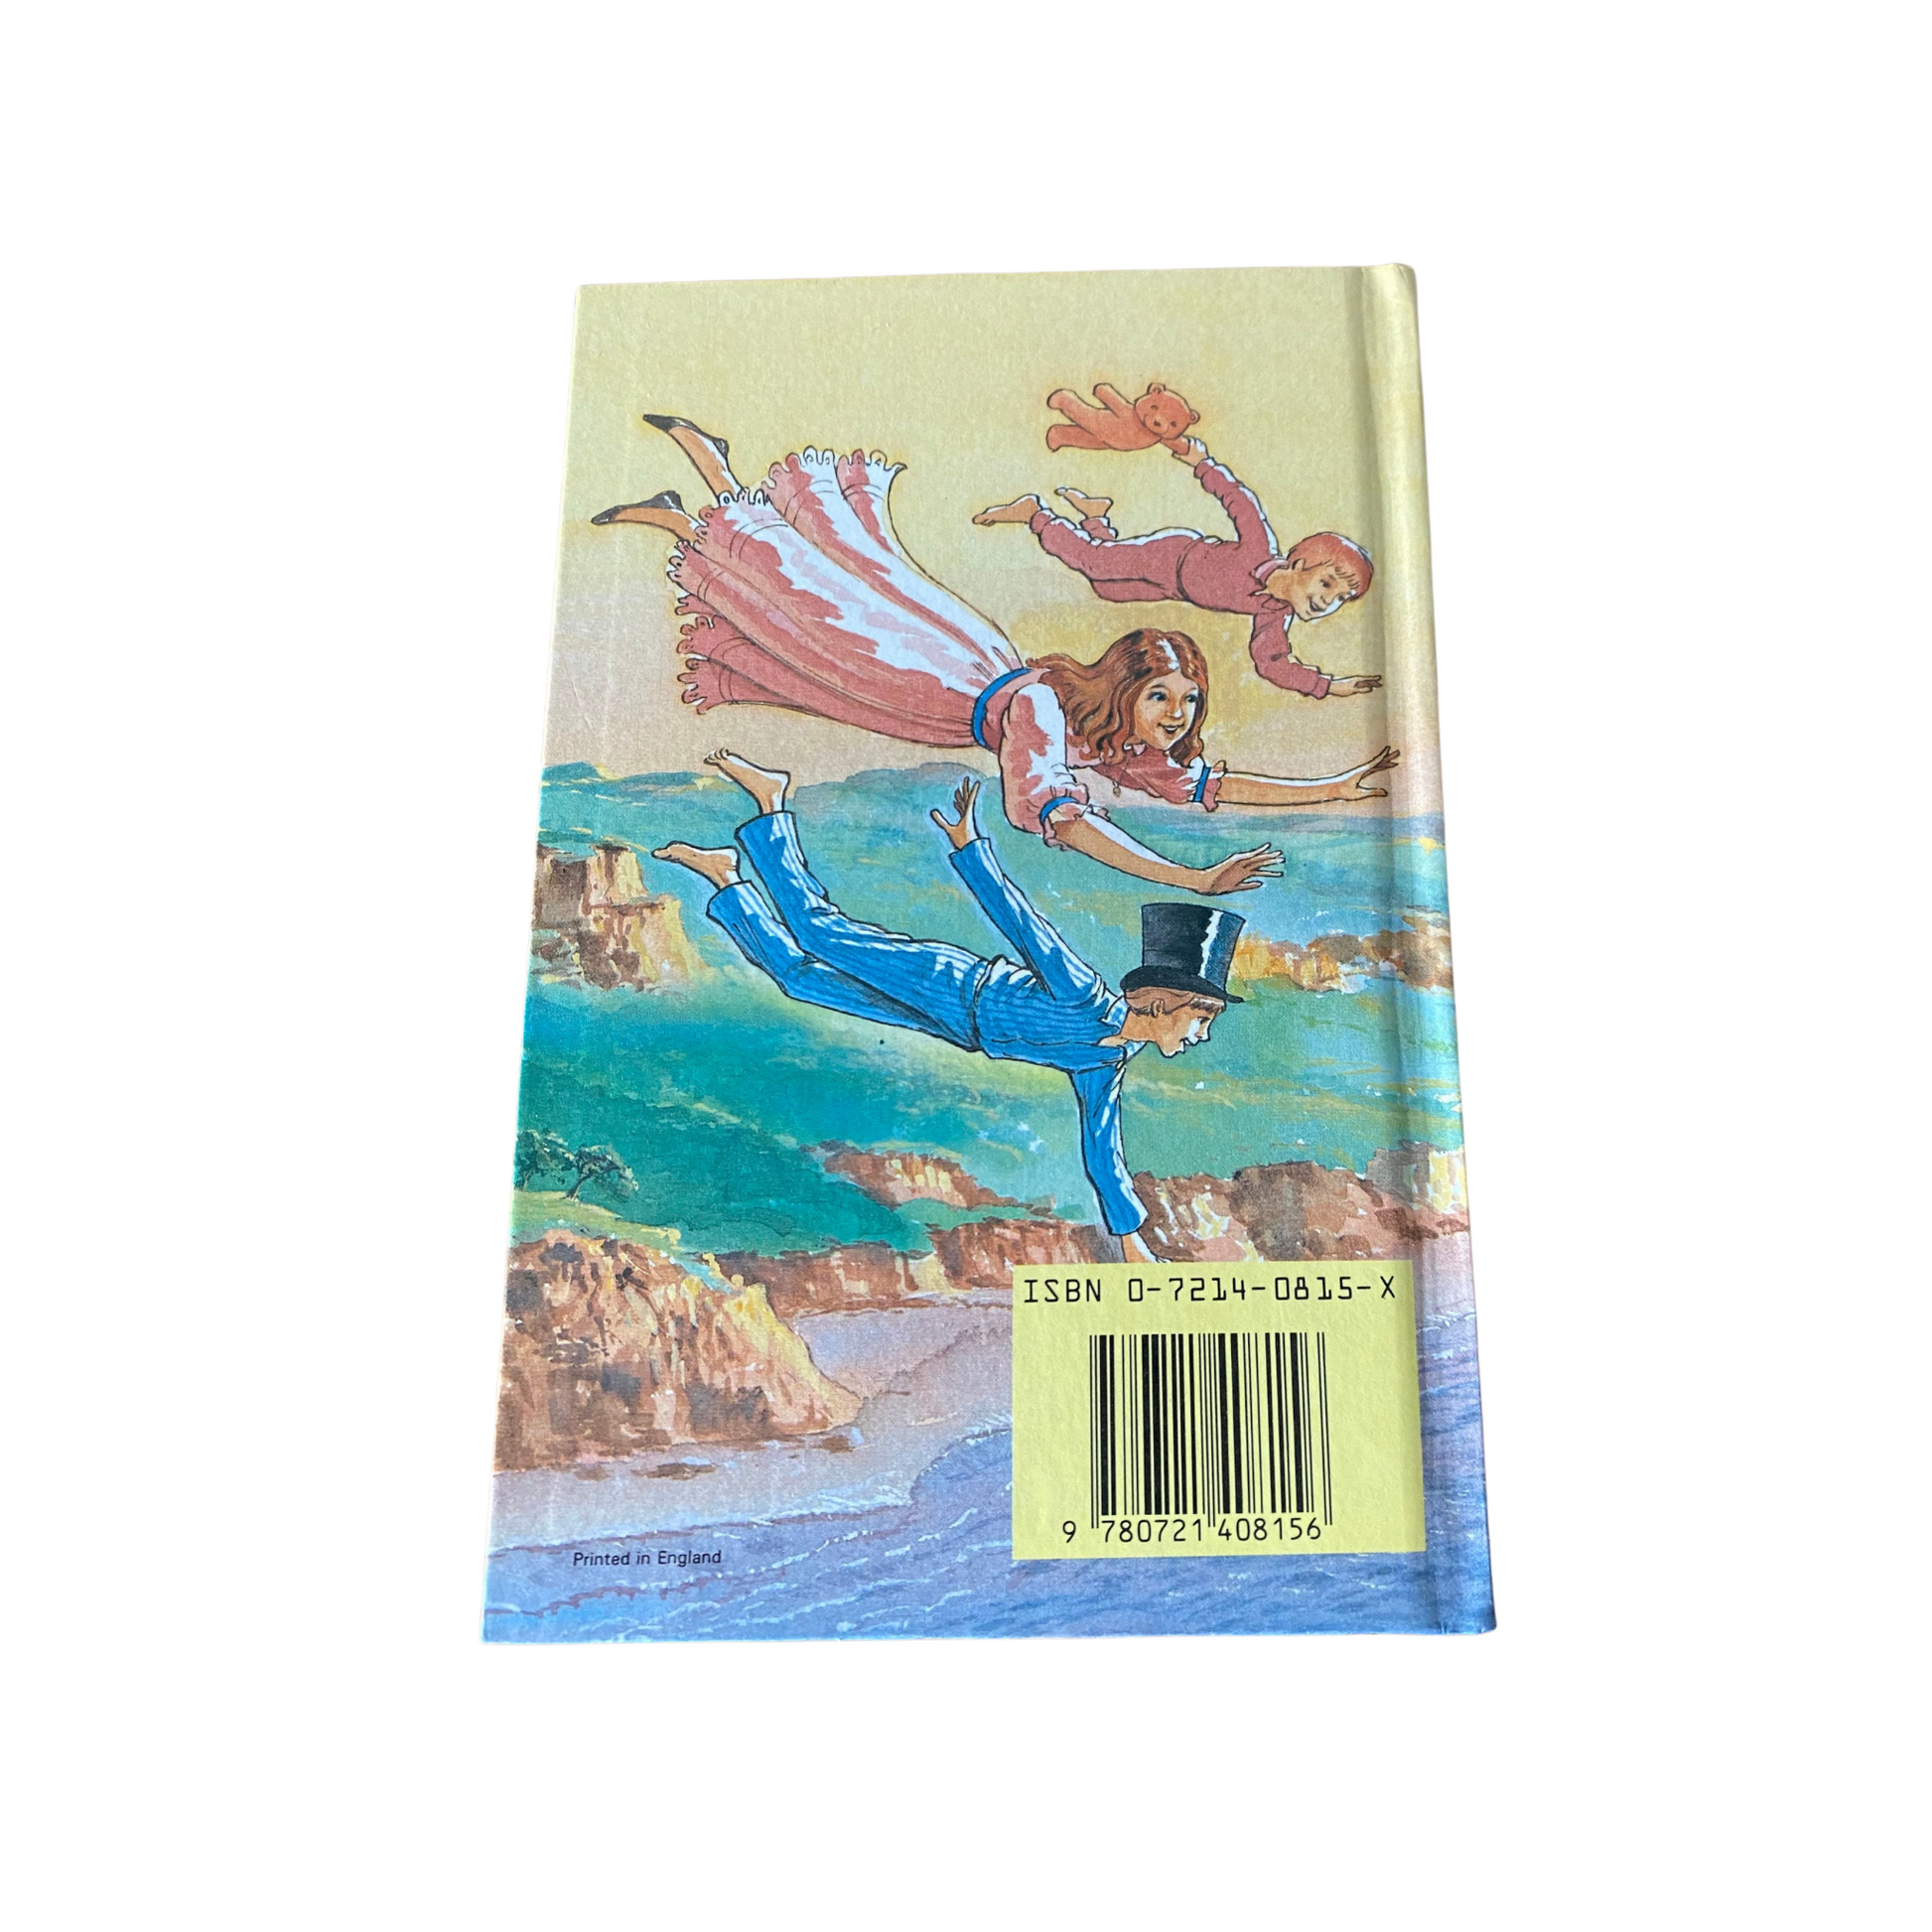 Nostalgic Ladybird book - Peter Pan   a delightful addition to any collection